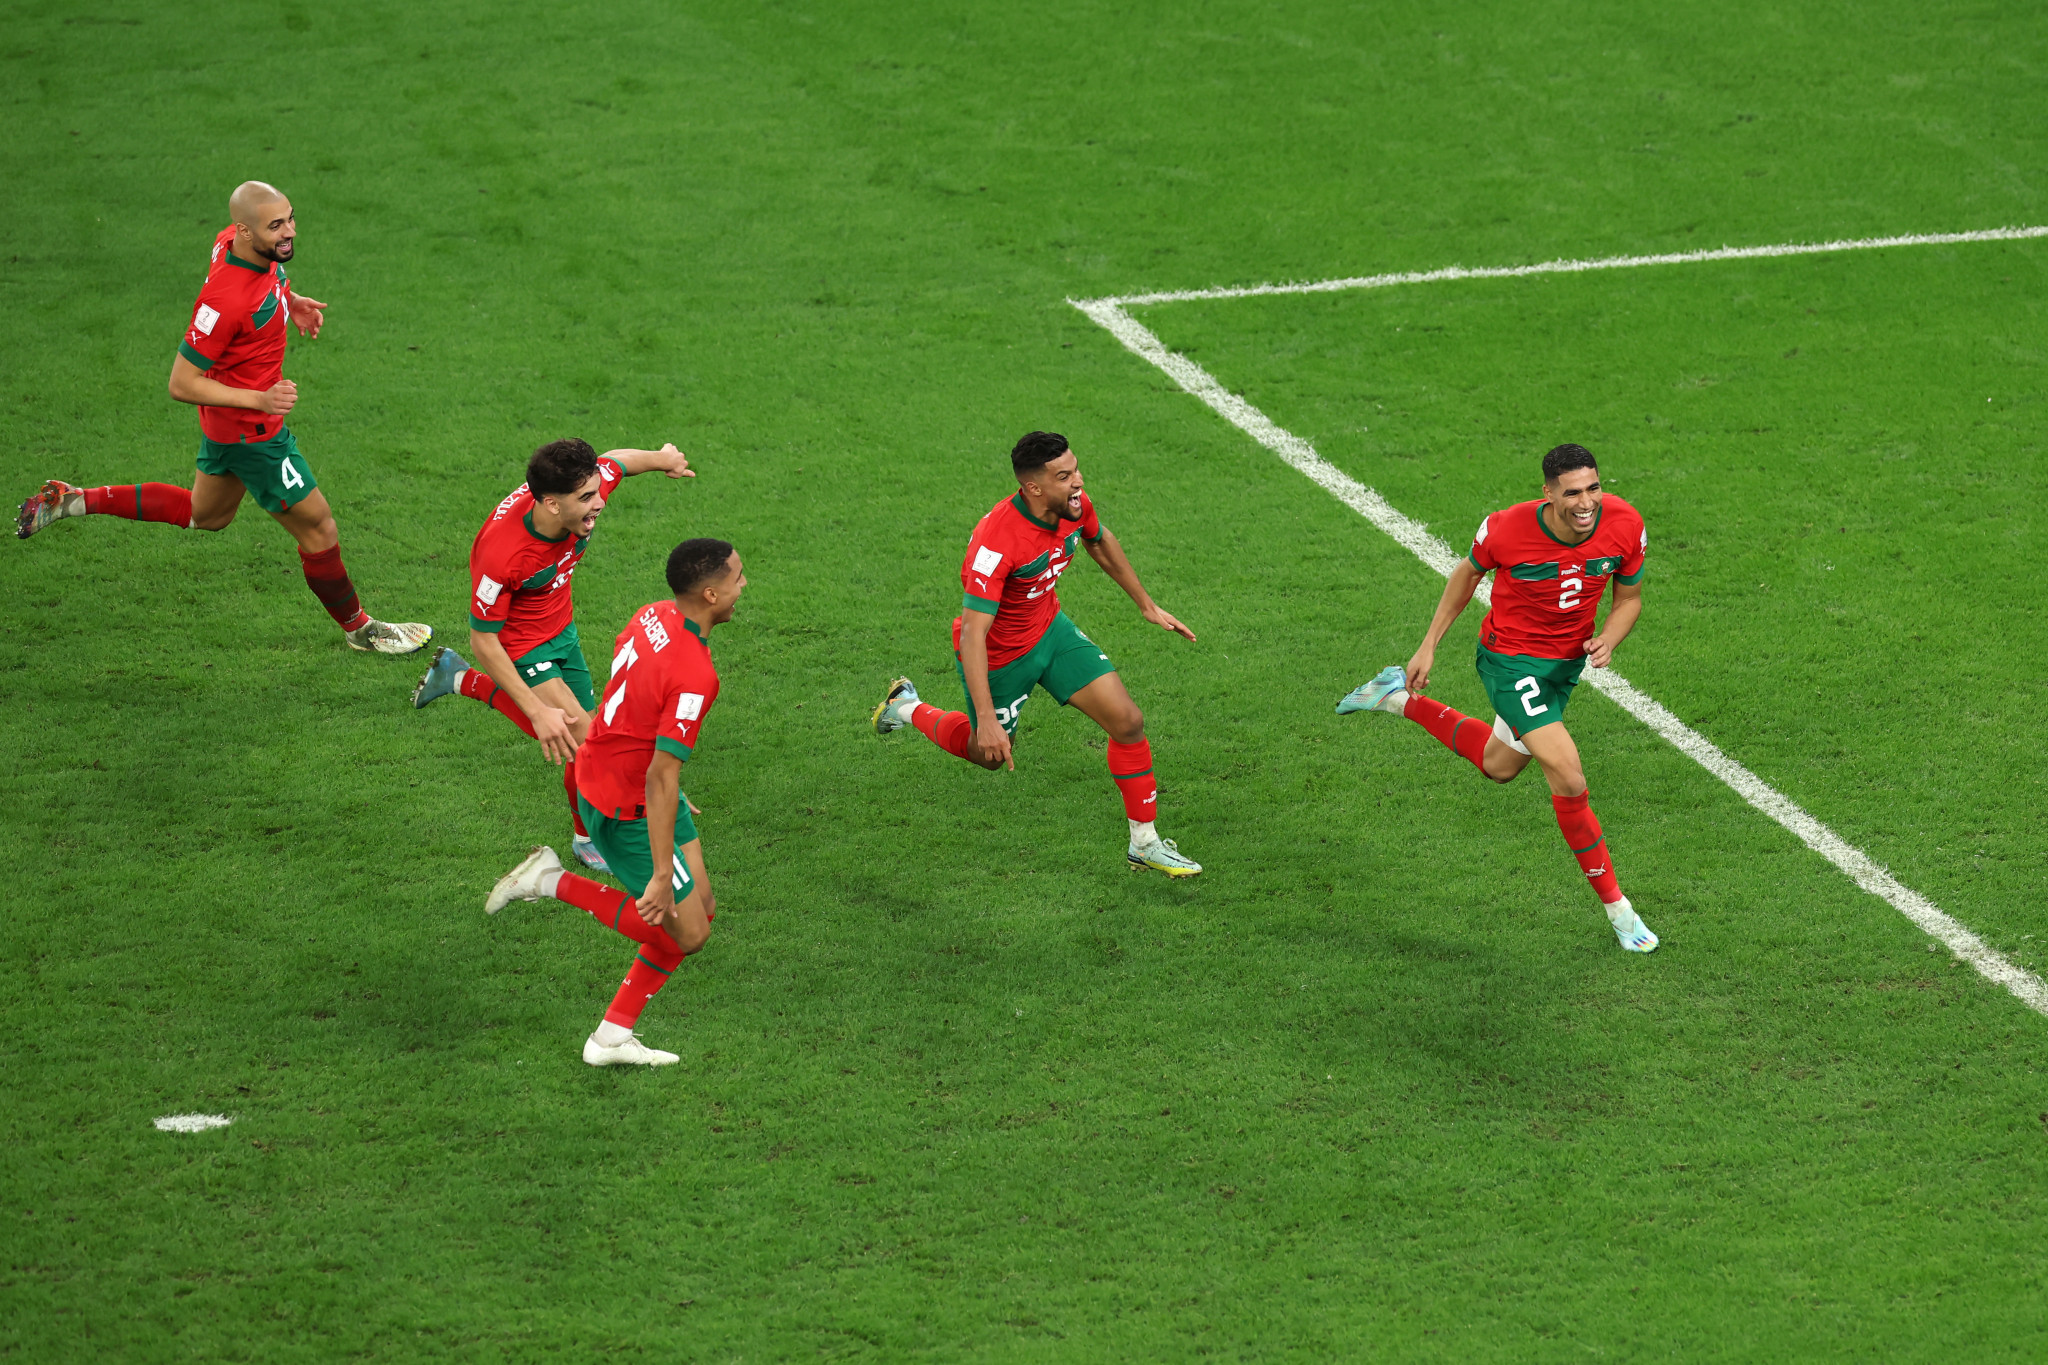 Morocco eliminate Spain to reach FIFA World Cup quarter-finals for first time 